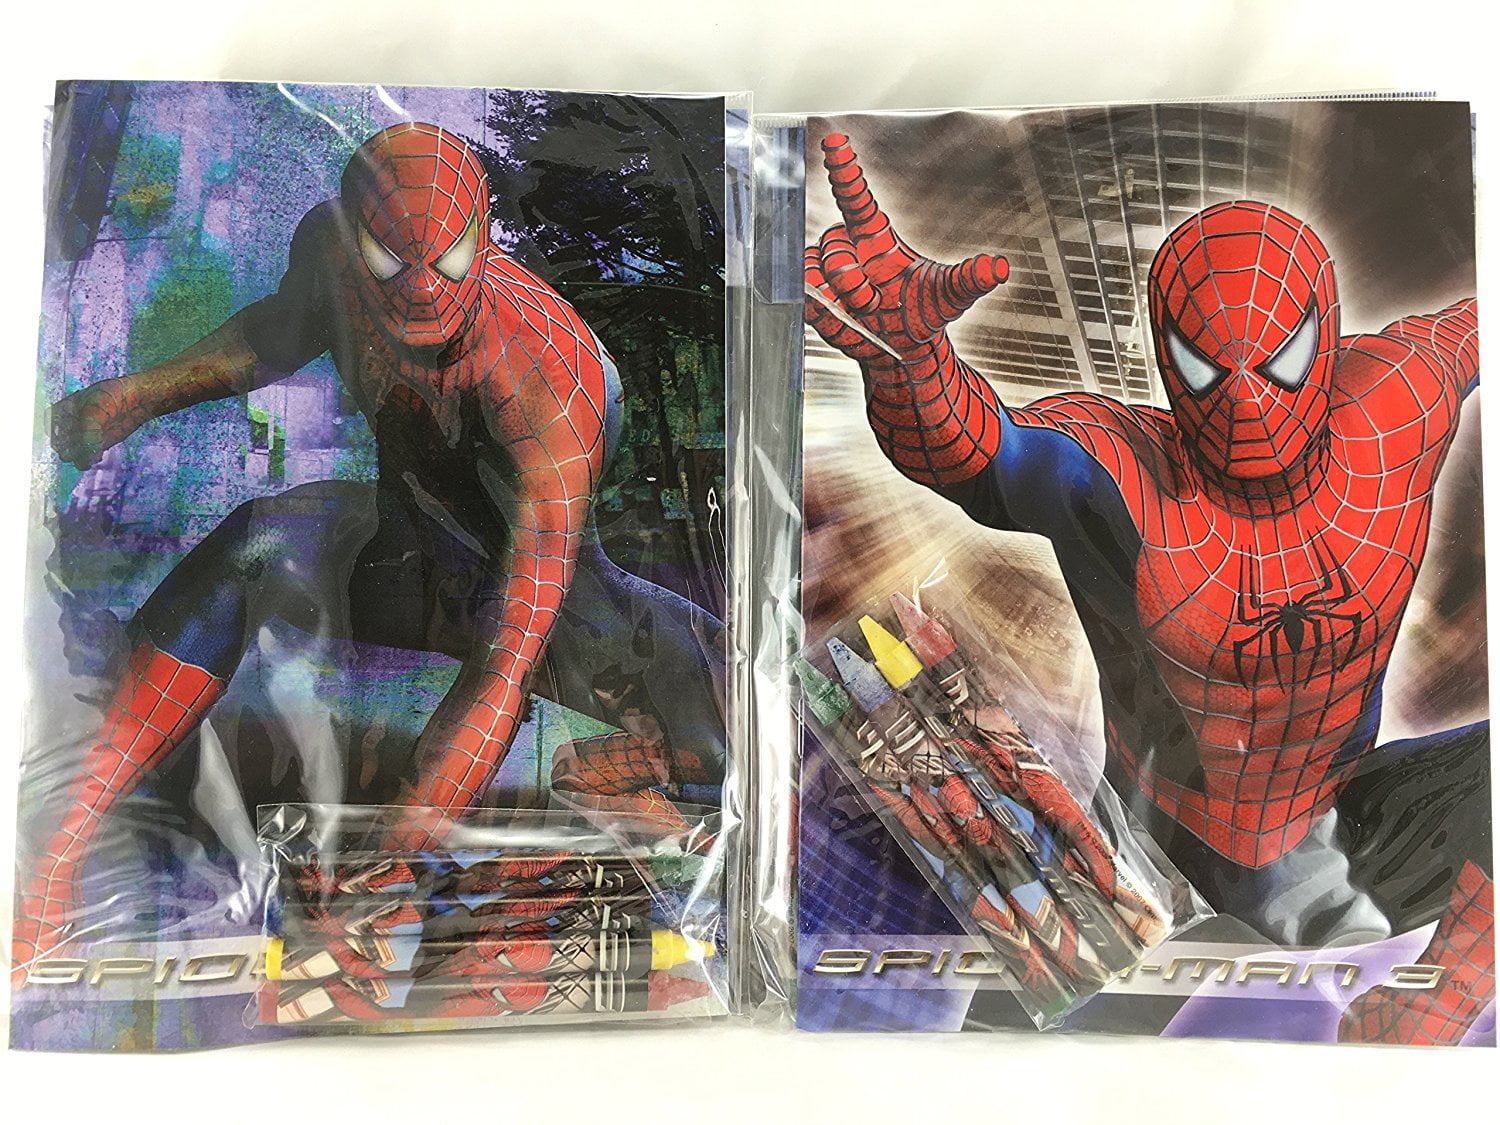 SPIDERMAN Coloring & Activity Books by MARVEL 2002 (2 in lot)